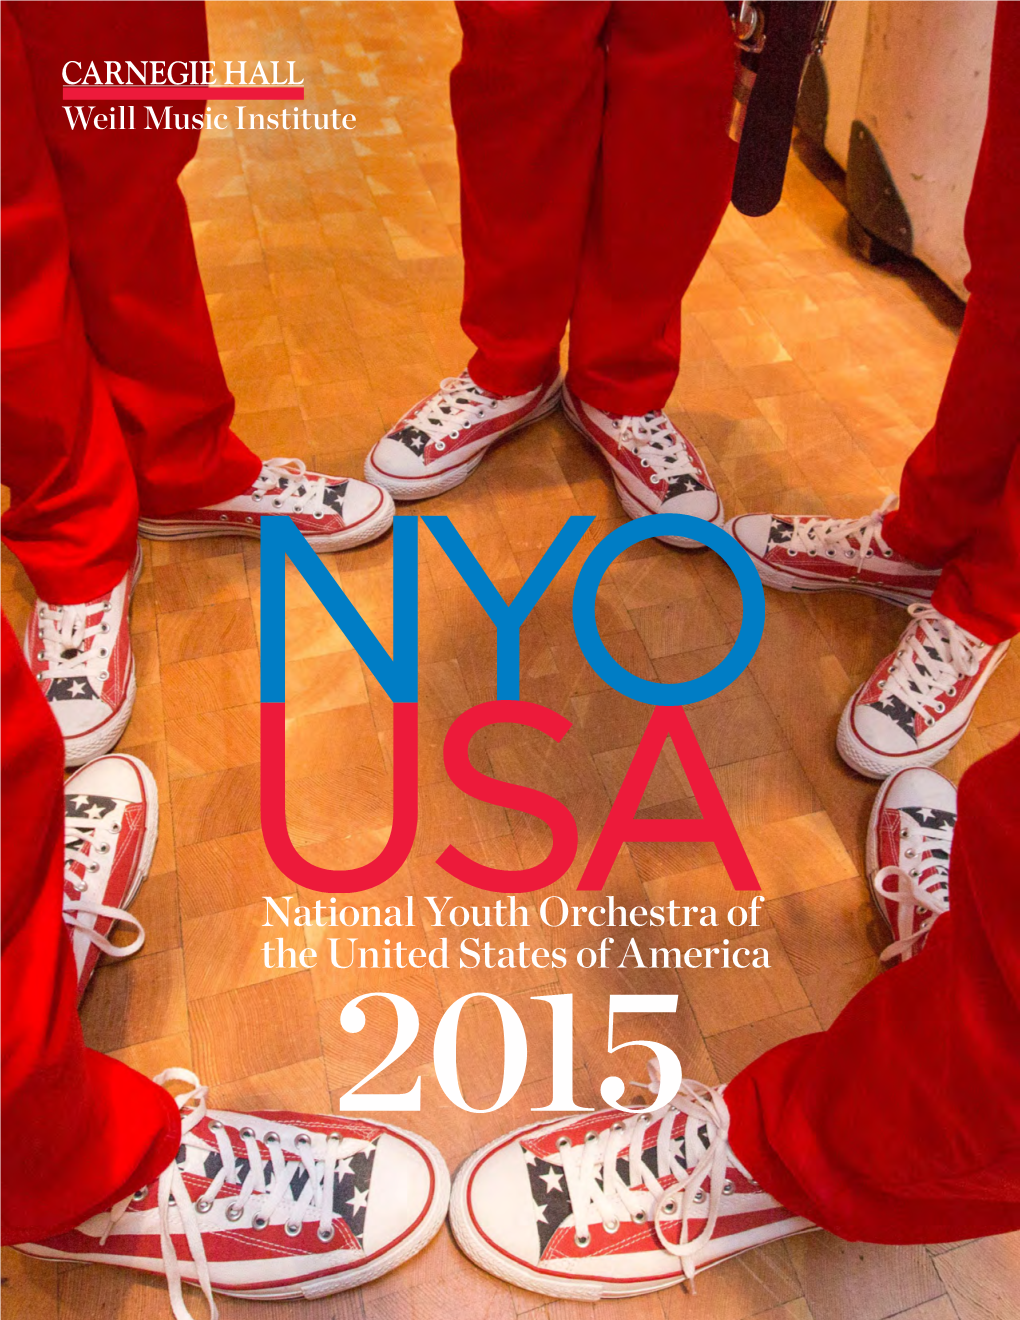 National Youth Orchestra of the United States of America 2015 Table of Contents